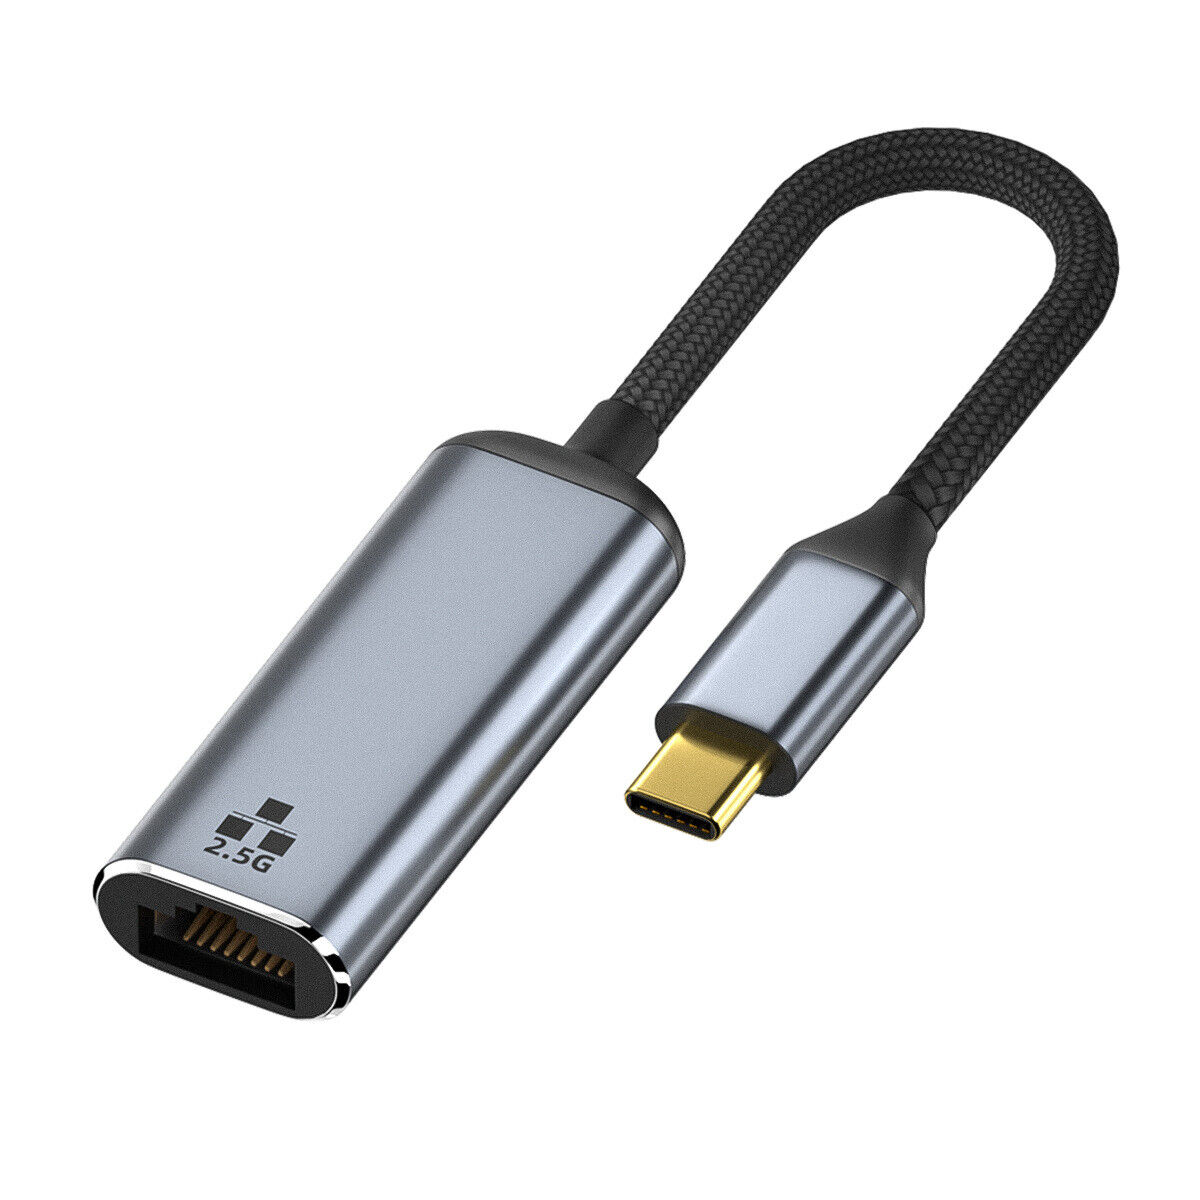 NFHK USB-C Type-C USB3.1 to 2500Mbps 2.5Gbps GBE Gigabit Ethernet Network